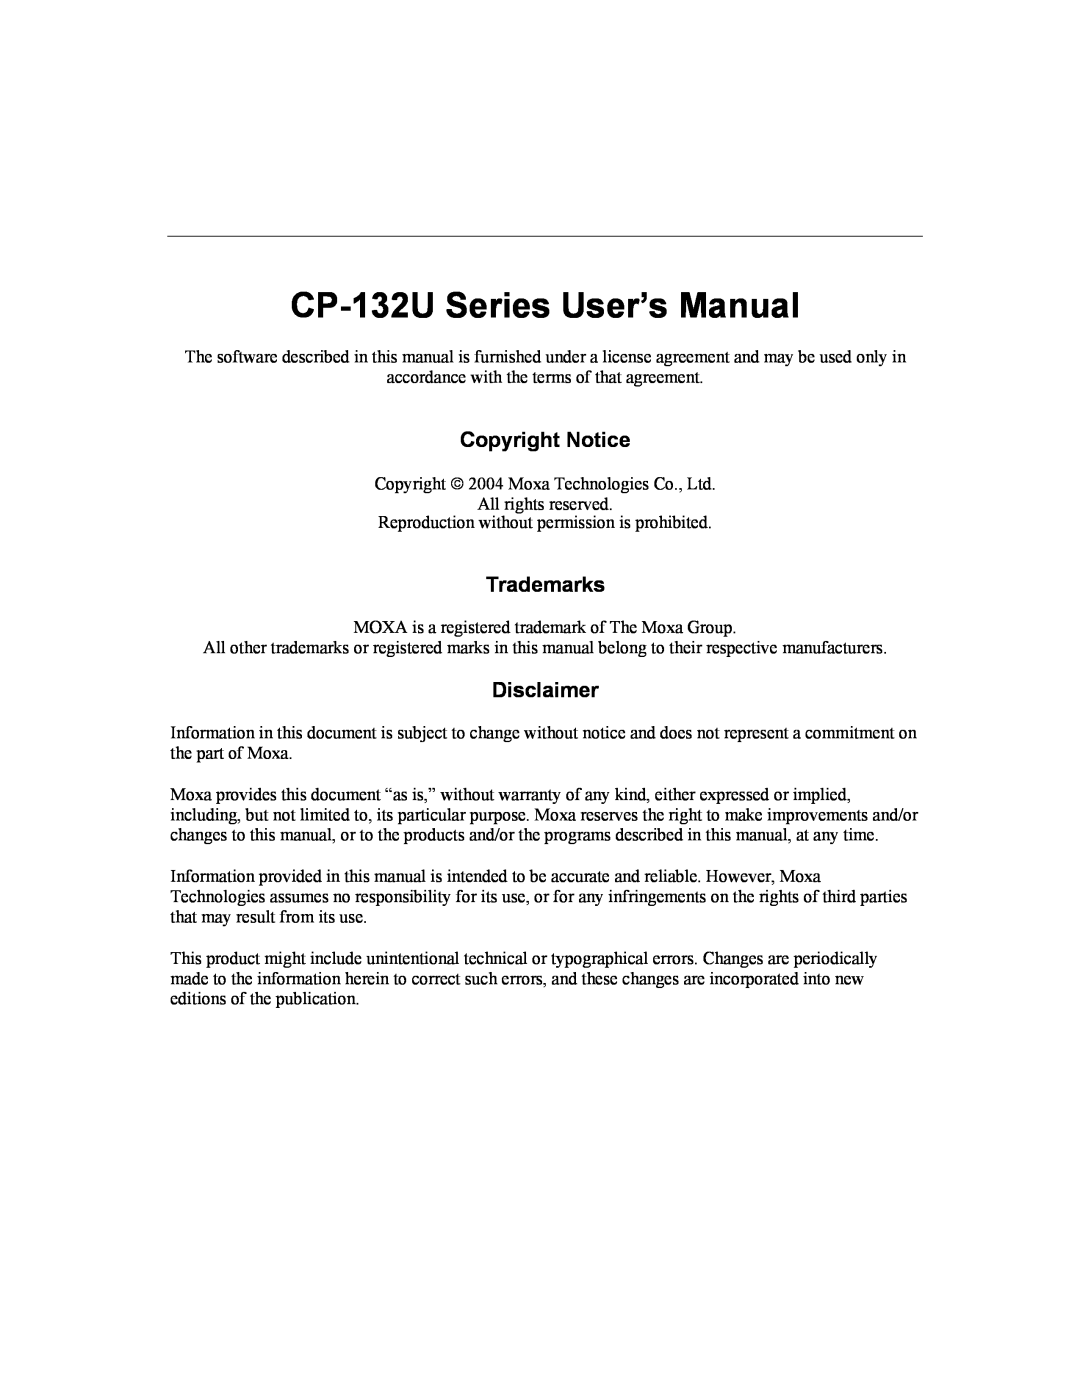 Moxa Technologies user manual Copyright Notice, Trademarks, Disclaimer, CP-132U Series User’s Manual 